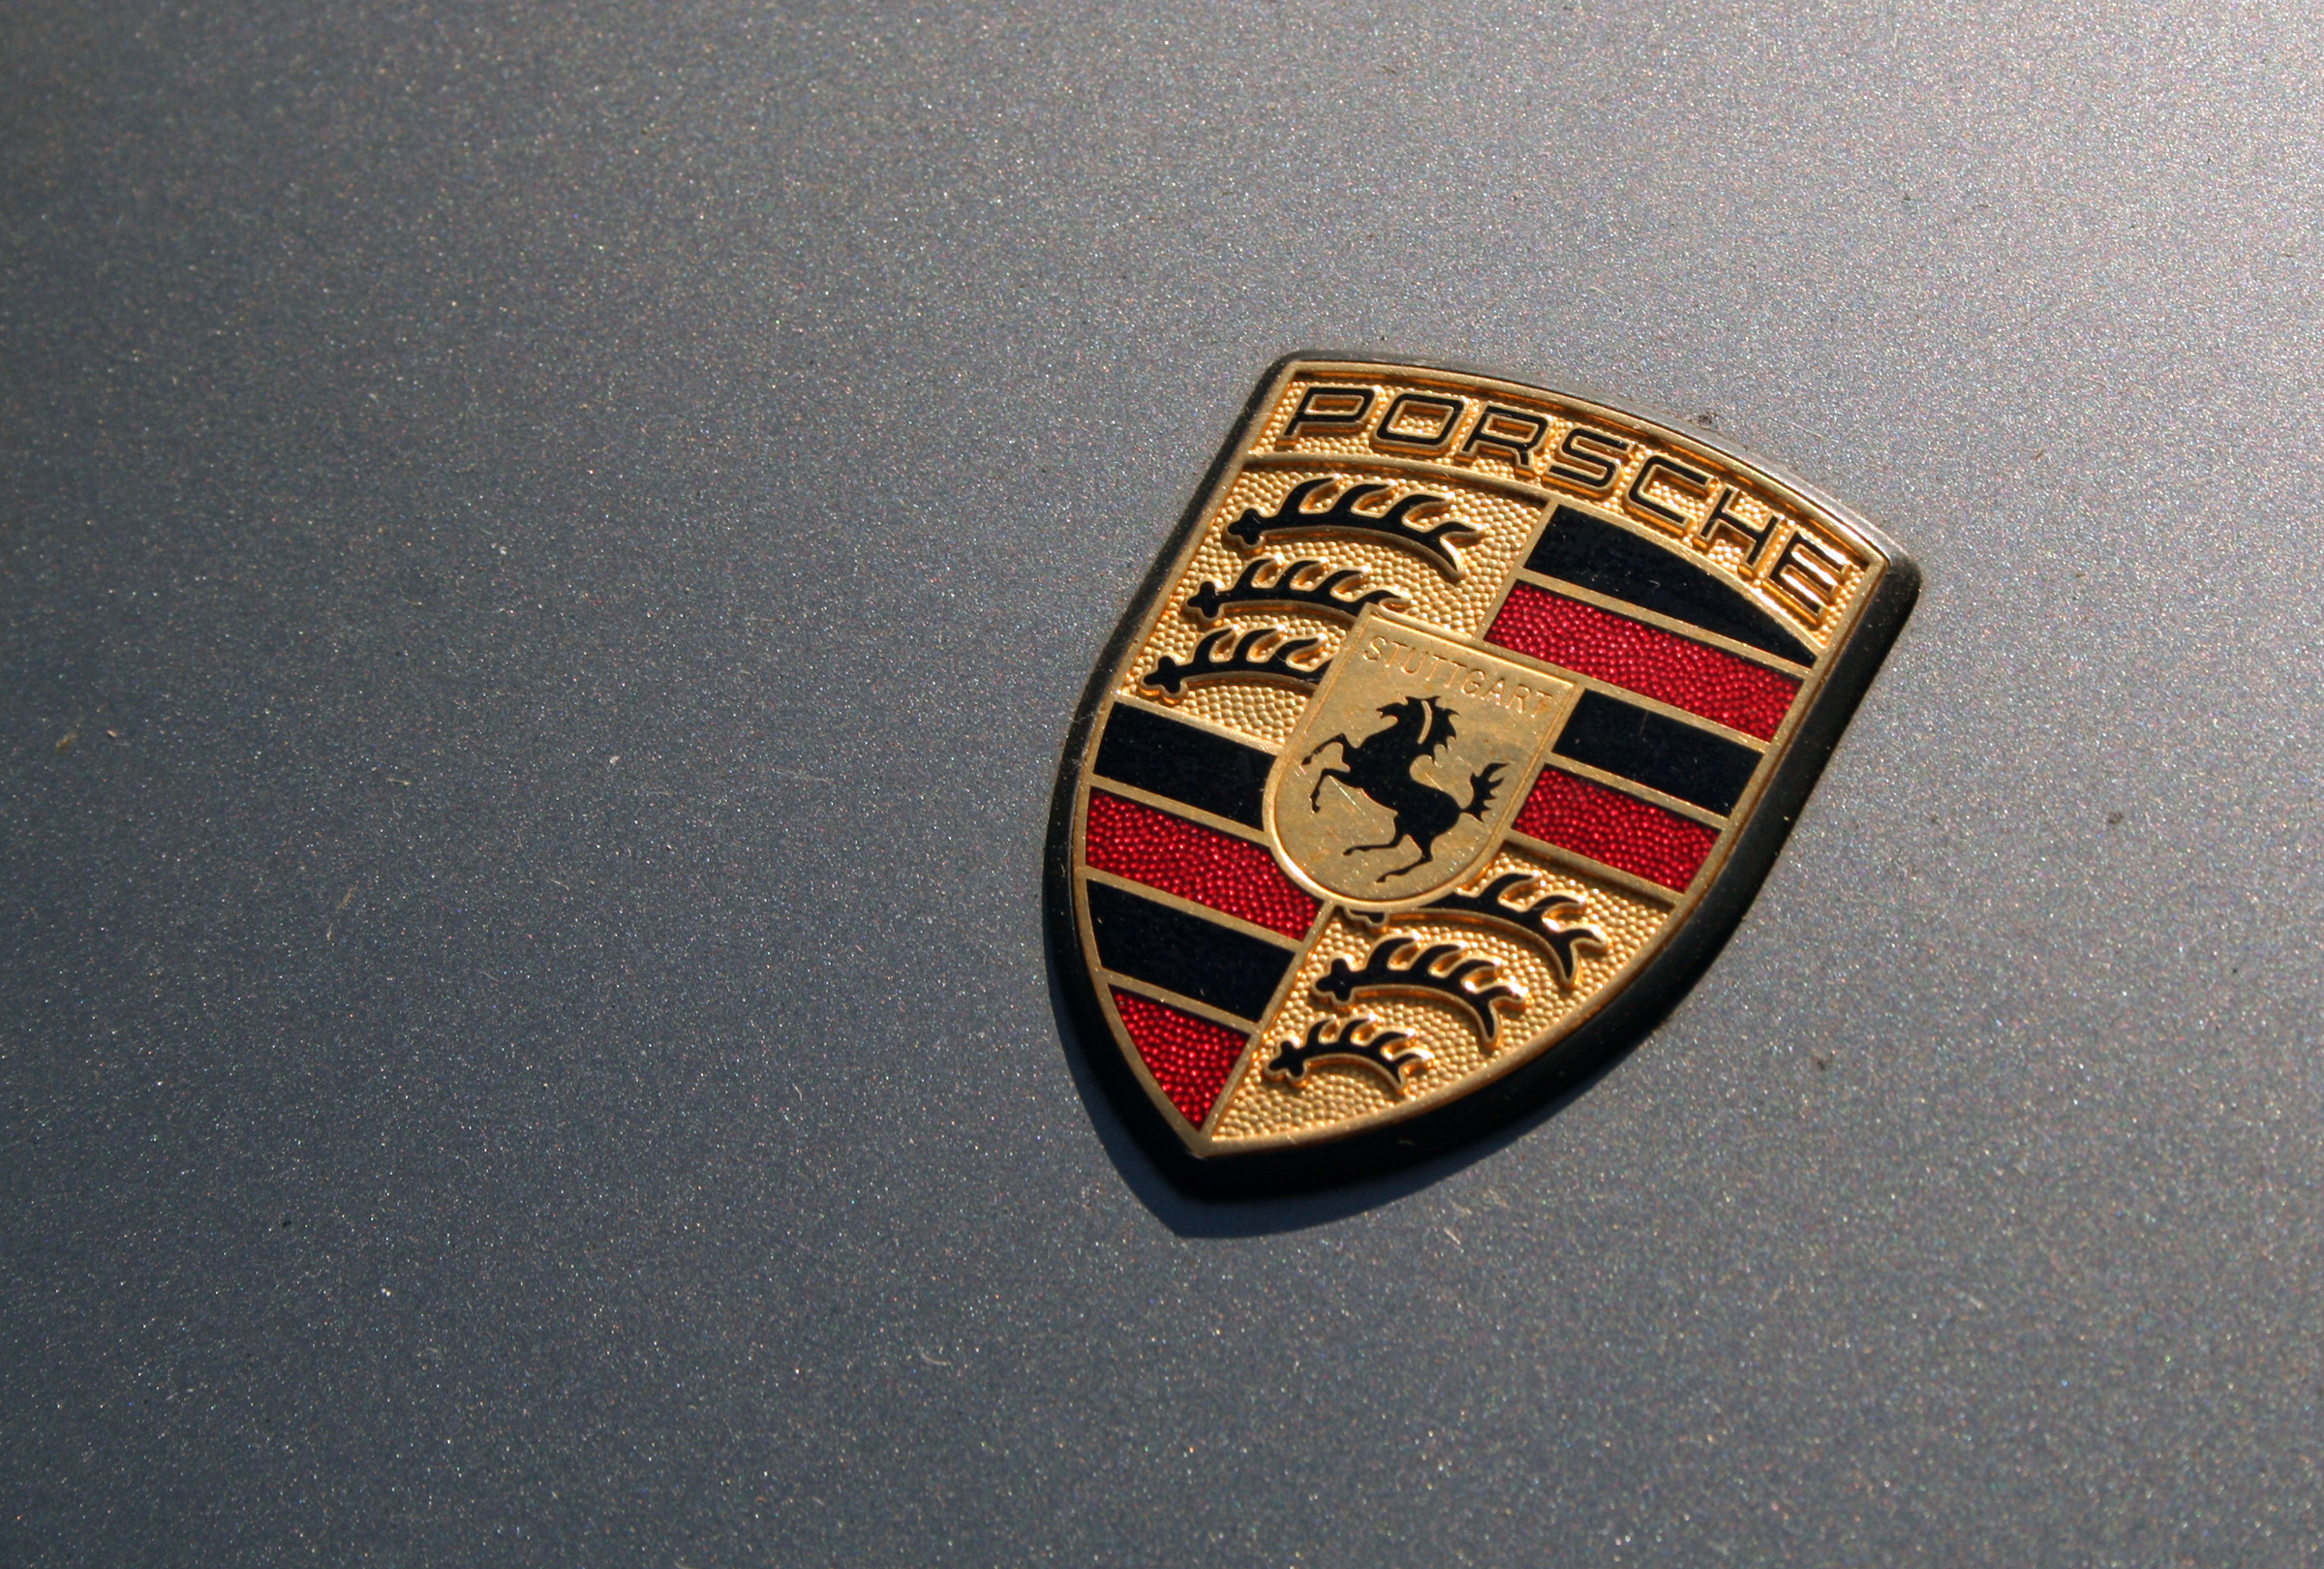 Going Green gets a Jolt: Porsche Ready to Unveil Plug-in Hybrid Model